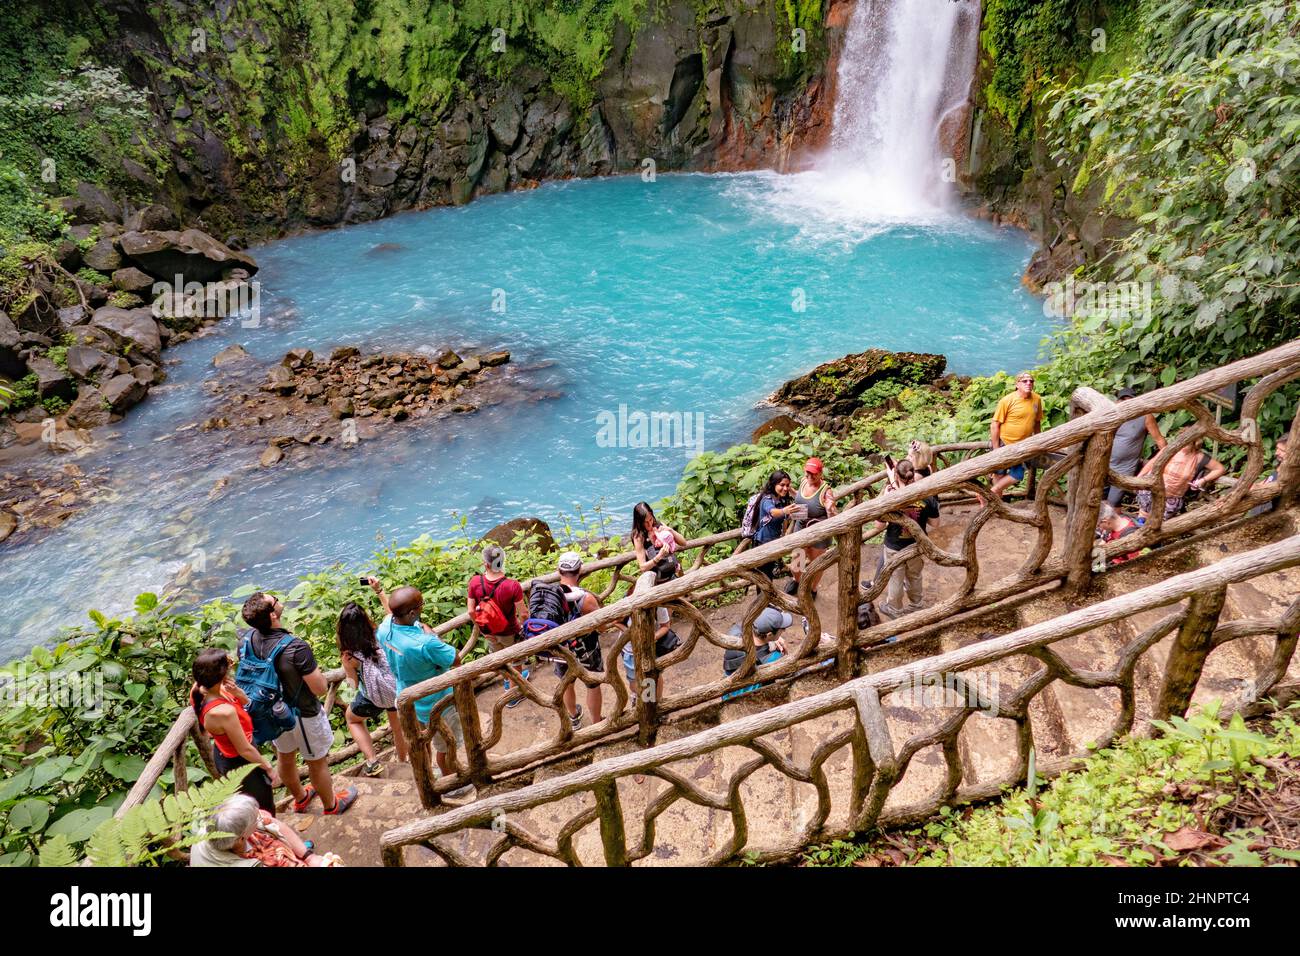 ourists watch from a platform the scenic waterfall in tenorio volcano national park Stock Photo